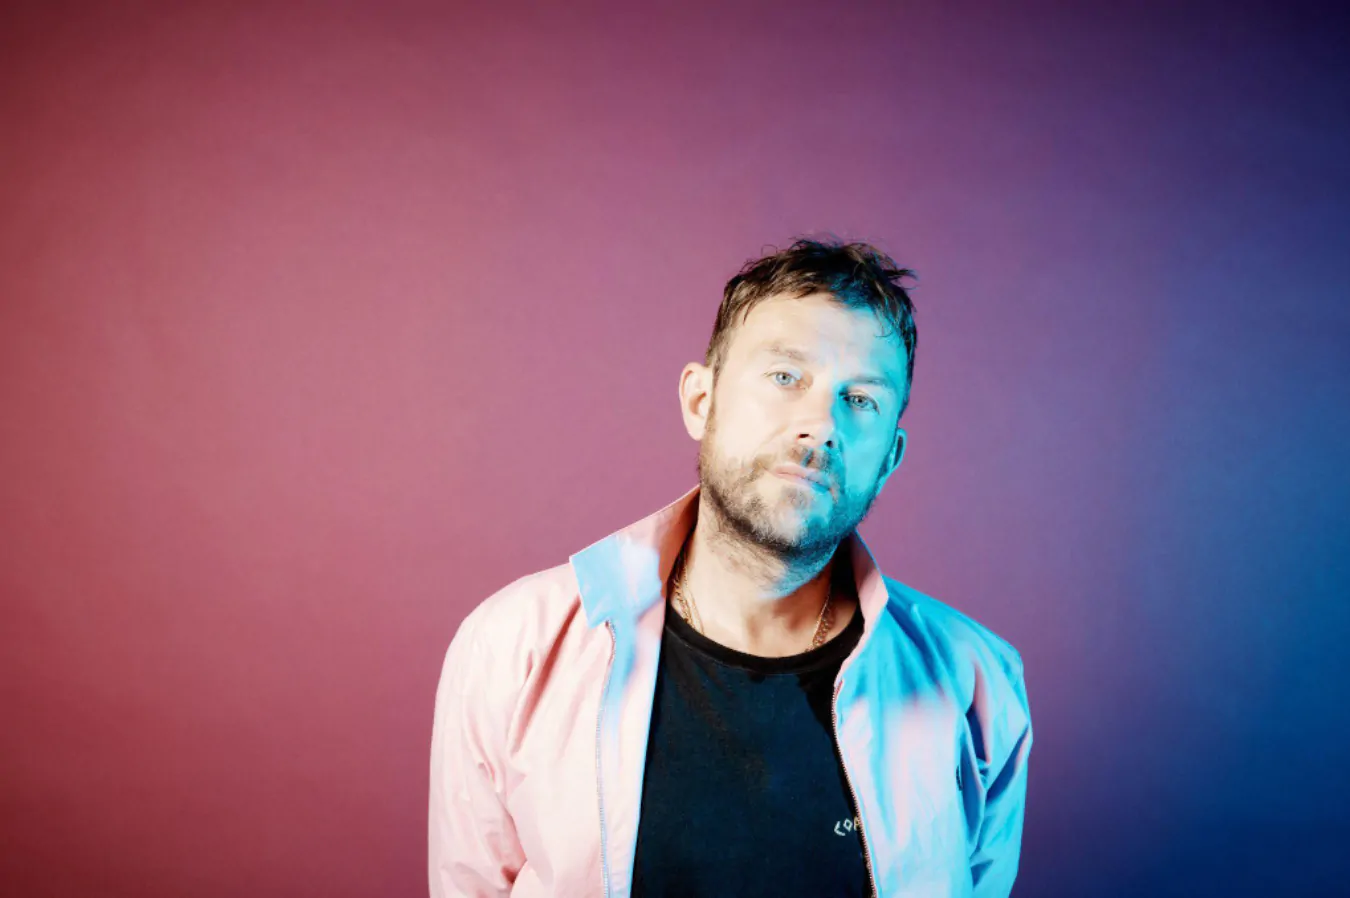 DAMON ALBARN releases ‘The Nearer The Fountain, More Pure The Stream Flows’ 4-disc digital deluxe edition